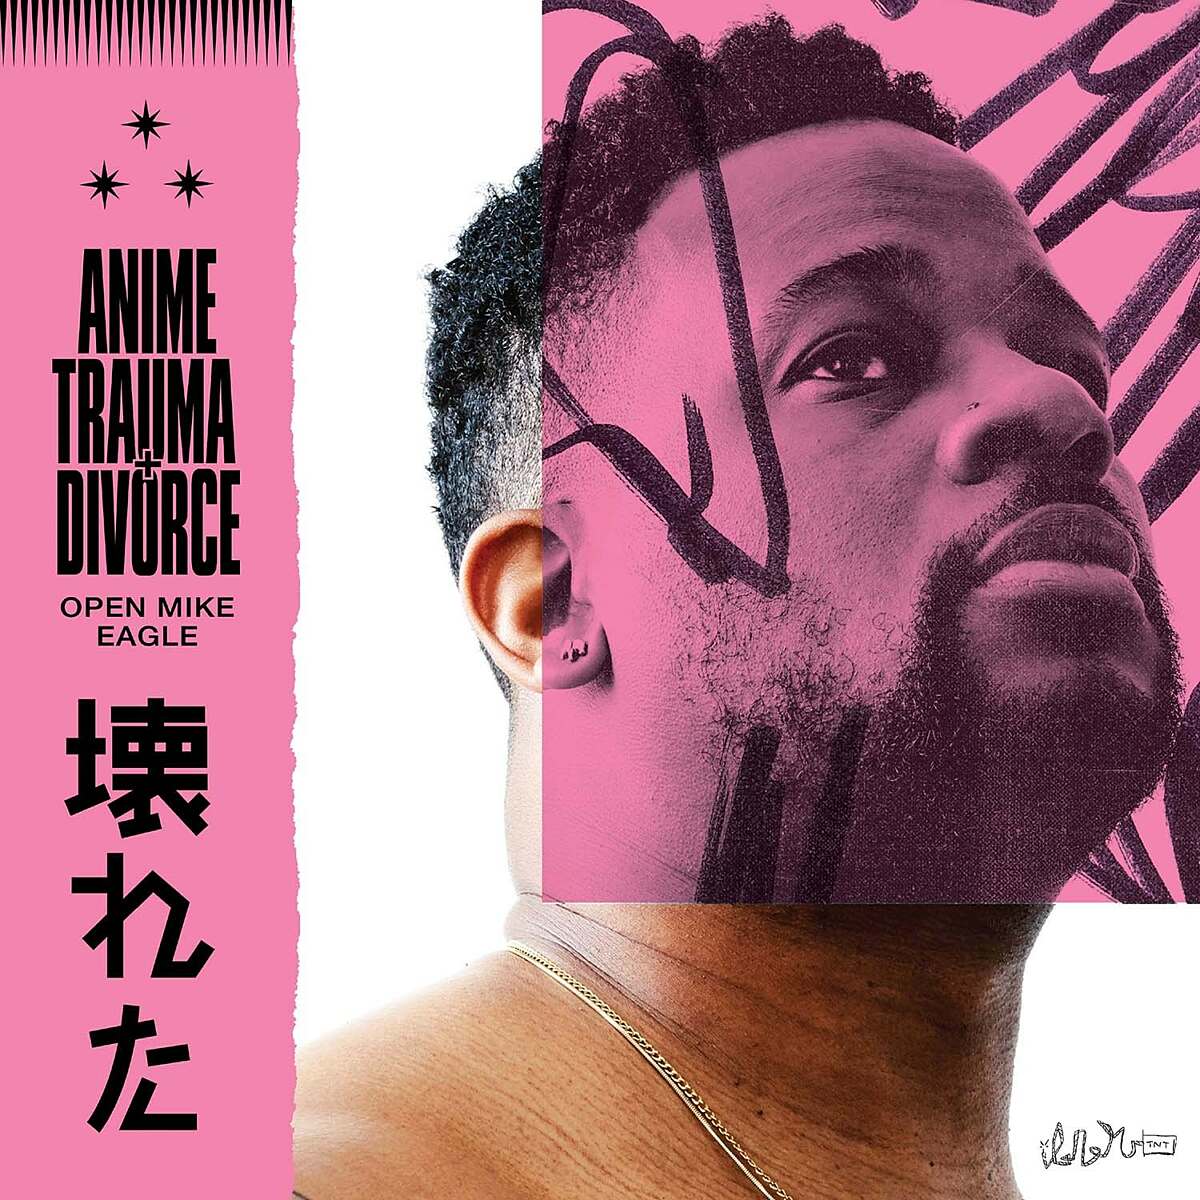 Open Mike Eagle - Anime, Trauma and Divorce review | DIY Magazine